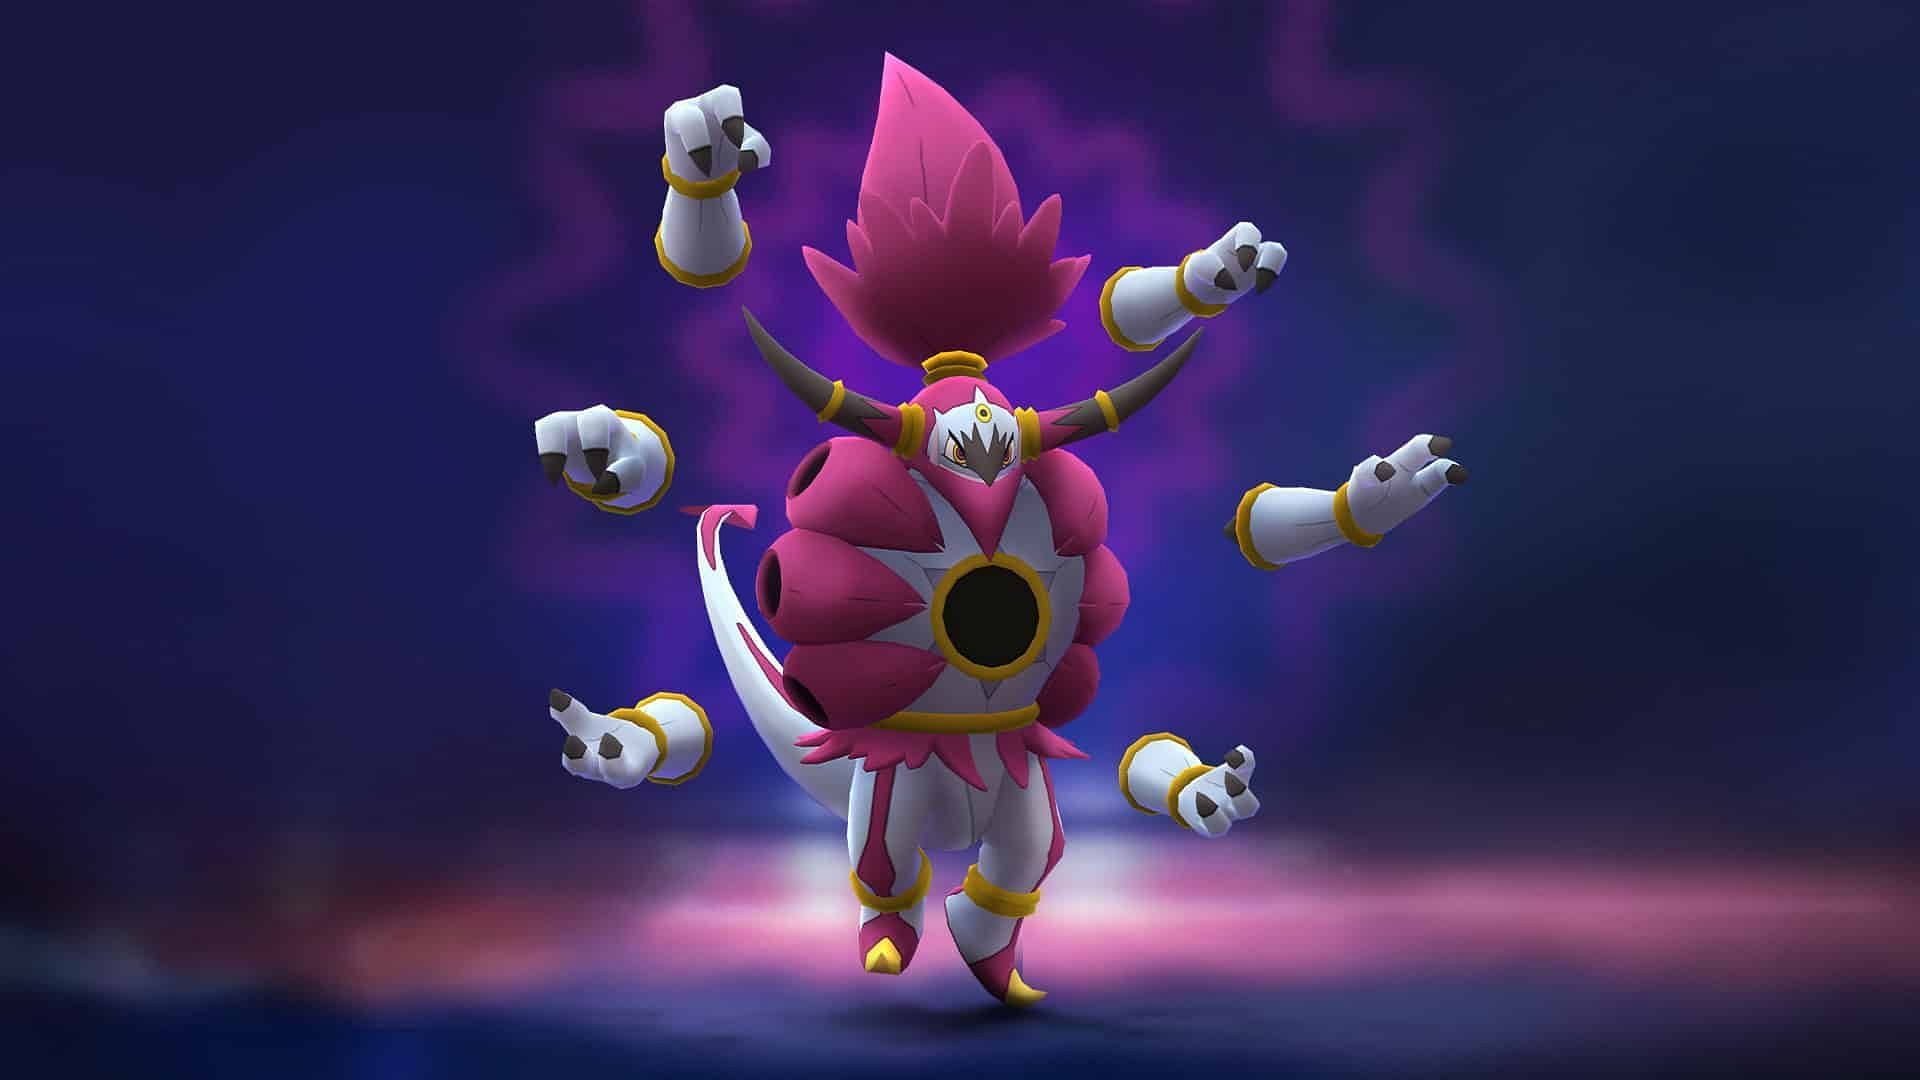 Unbound Hoopa returns for another round of Pokemon GO